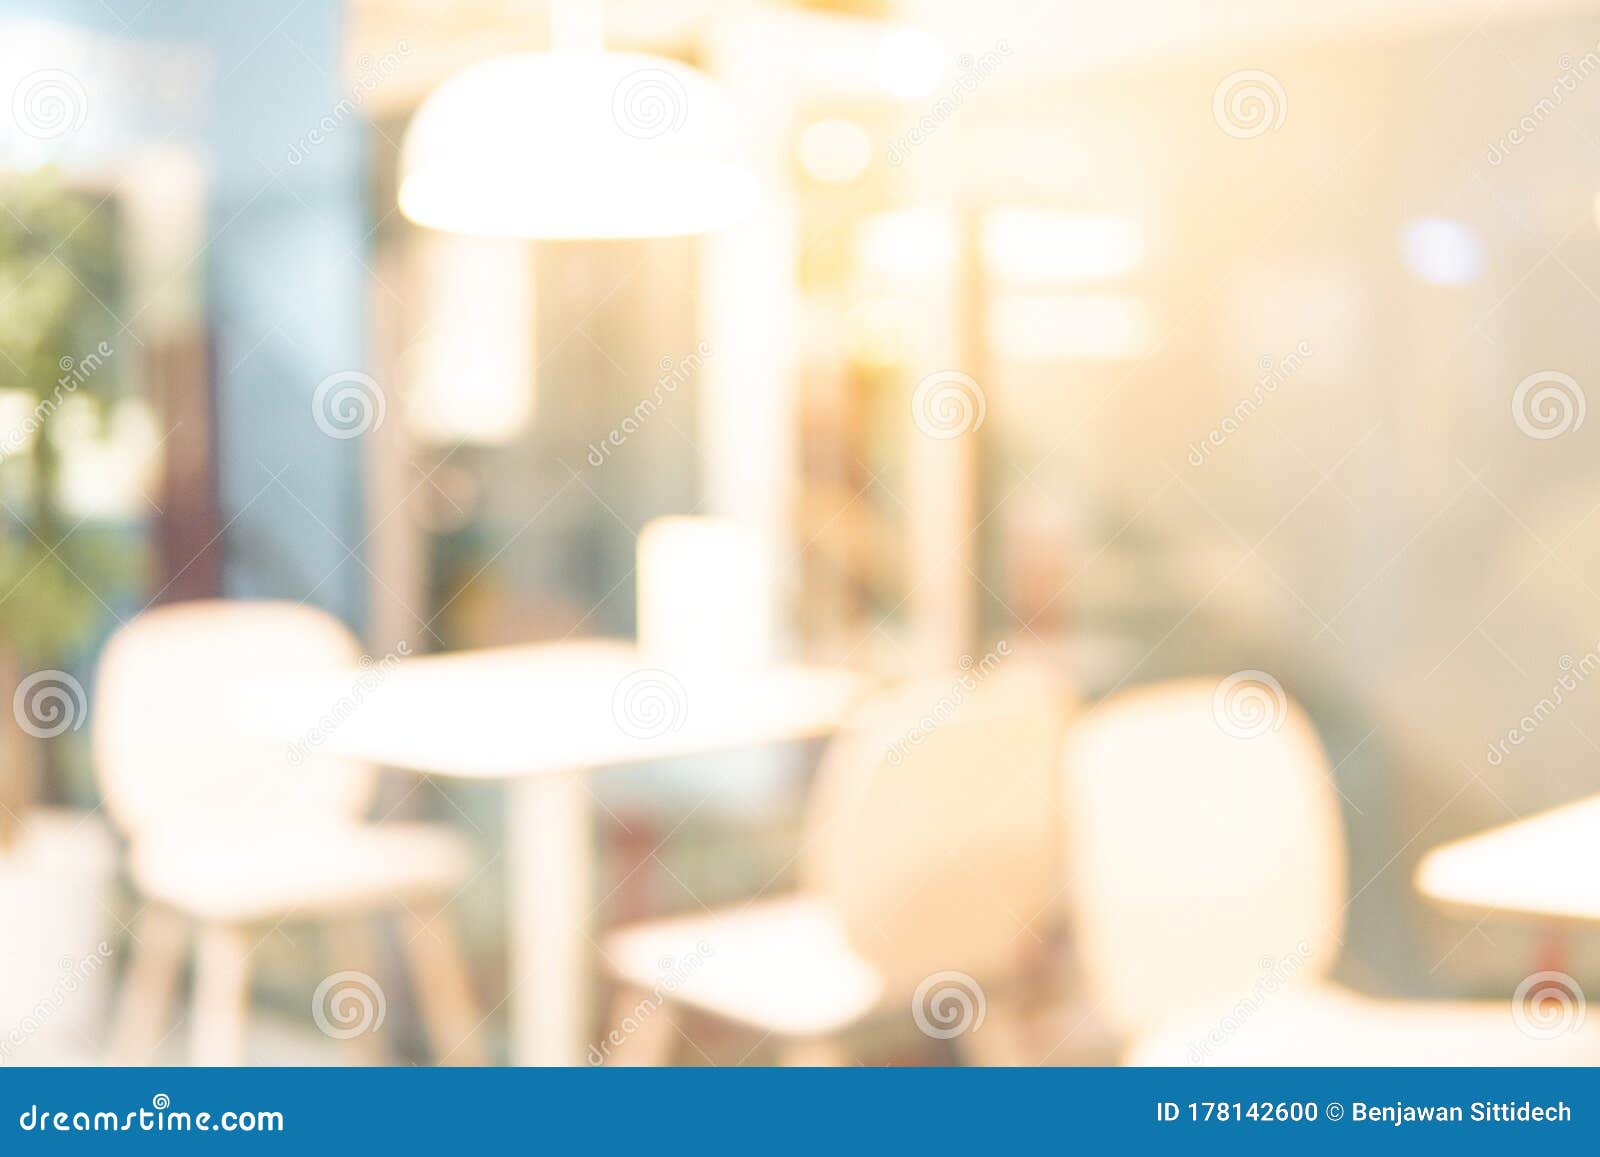 Abstract Blurred Restaurant and Cafe Background Stock Photo - Image of  bright, empty: 178142600